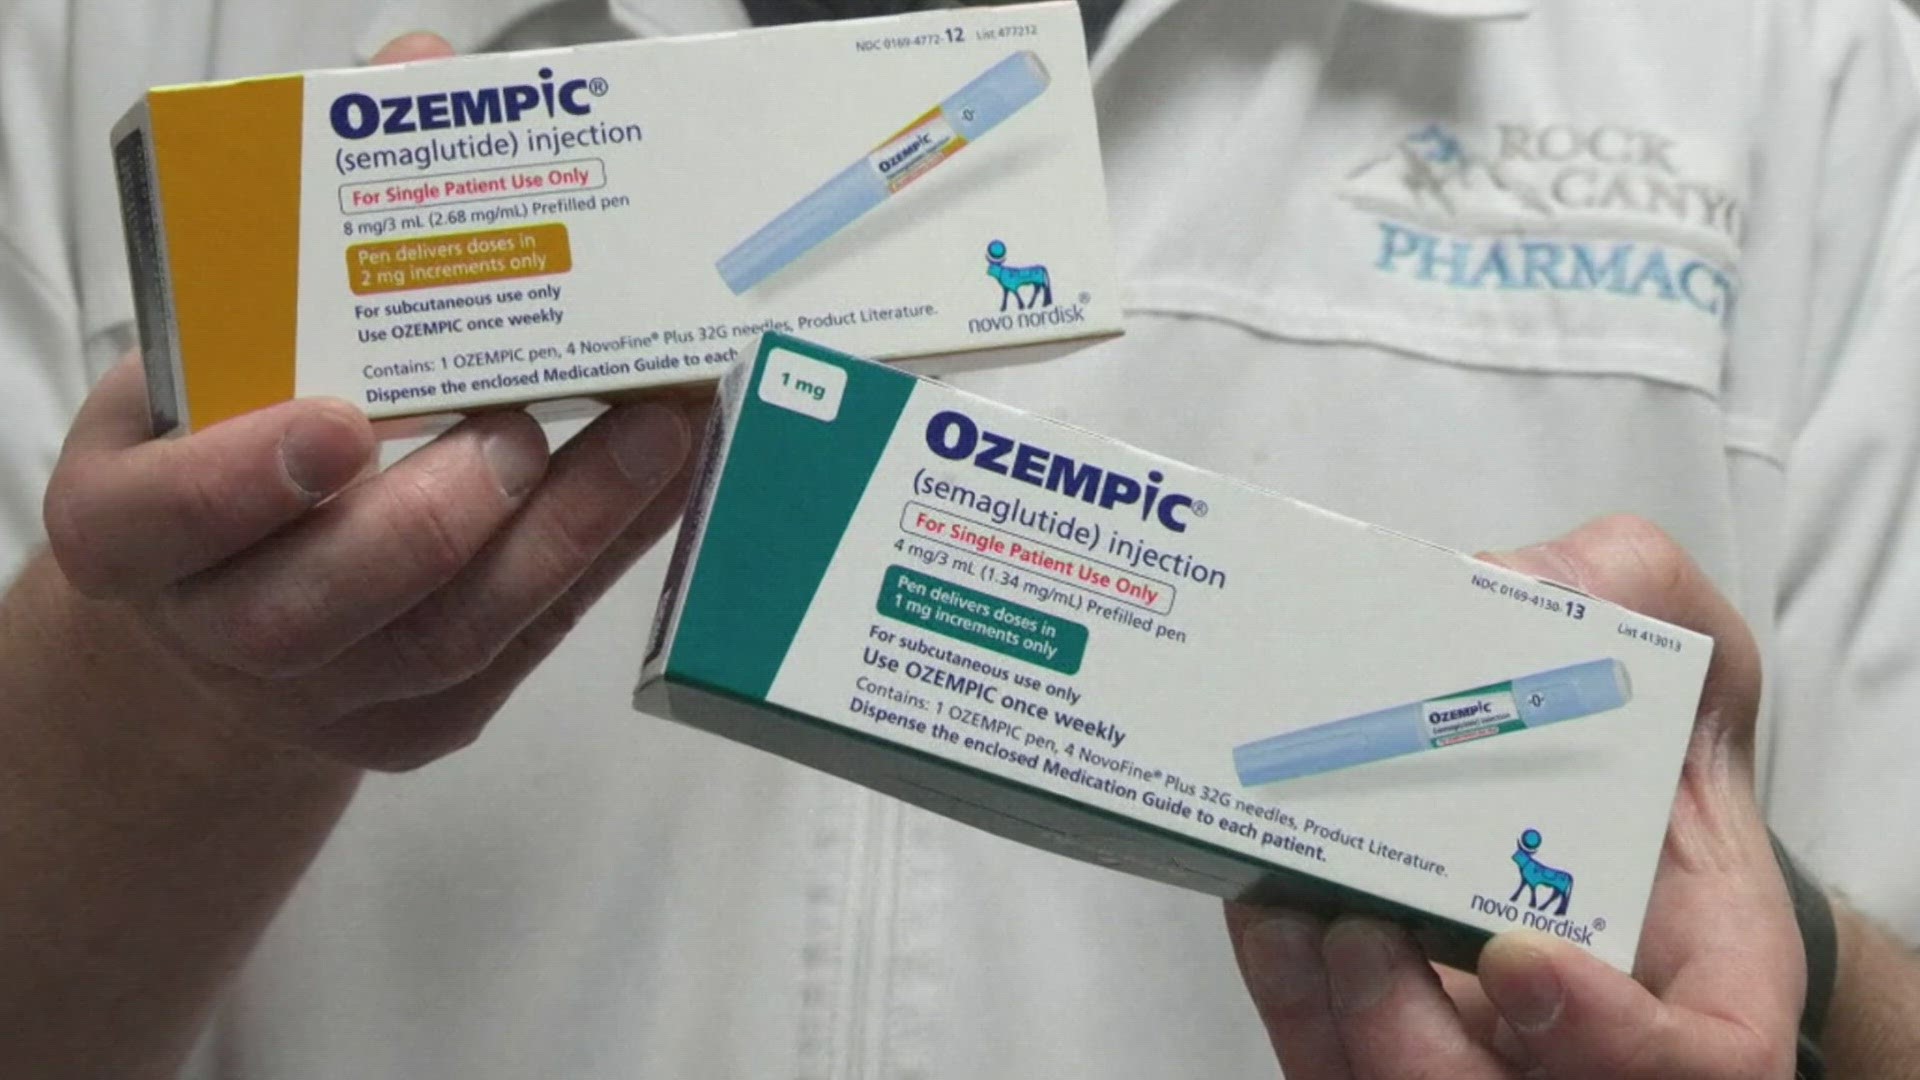 Ozempic is a diabetes medication that can also support weight loss. It's pretty expensive and people are looking into dupes to cut costs.